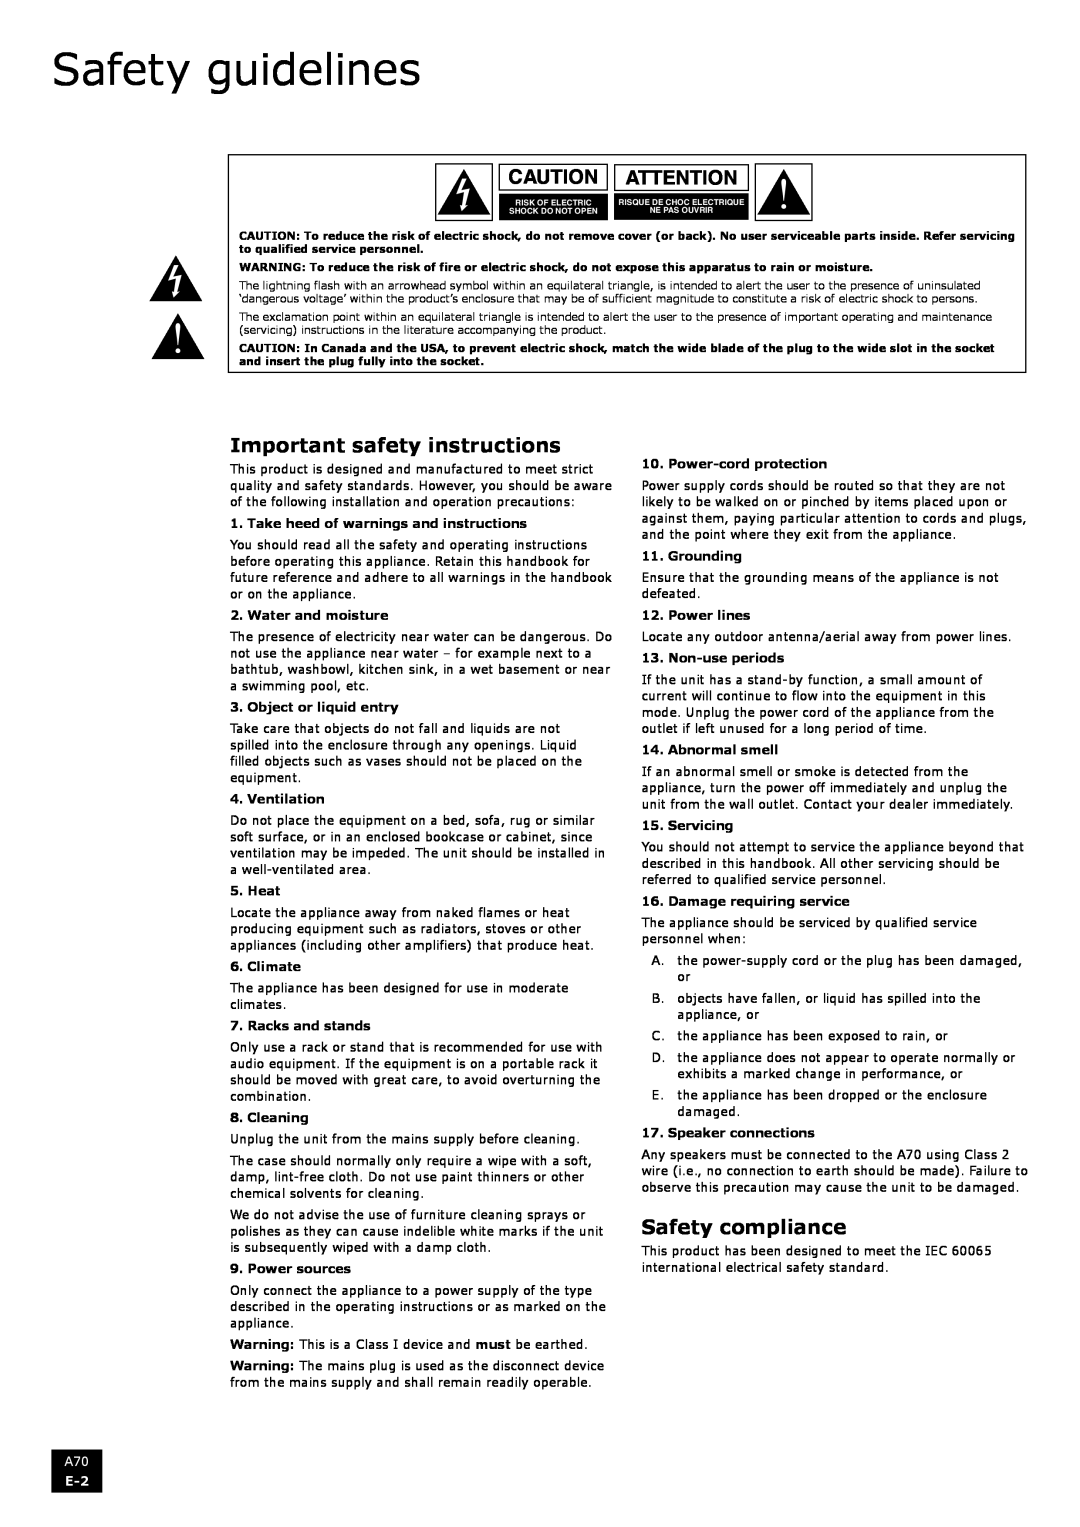 Arcam A70 Safety guidelines, Caution Attention, Important safety instructions, Safety compliance, Water and moisture, Heat 